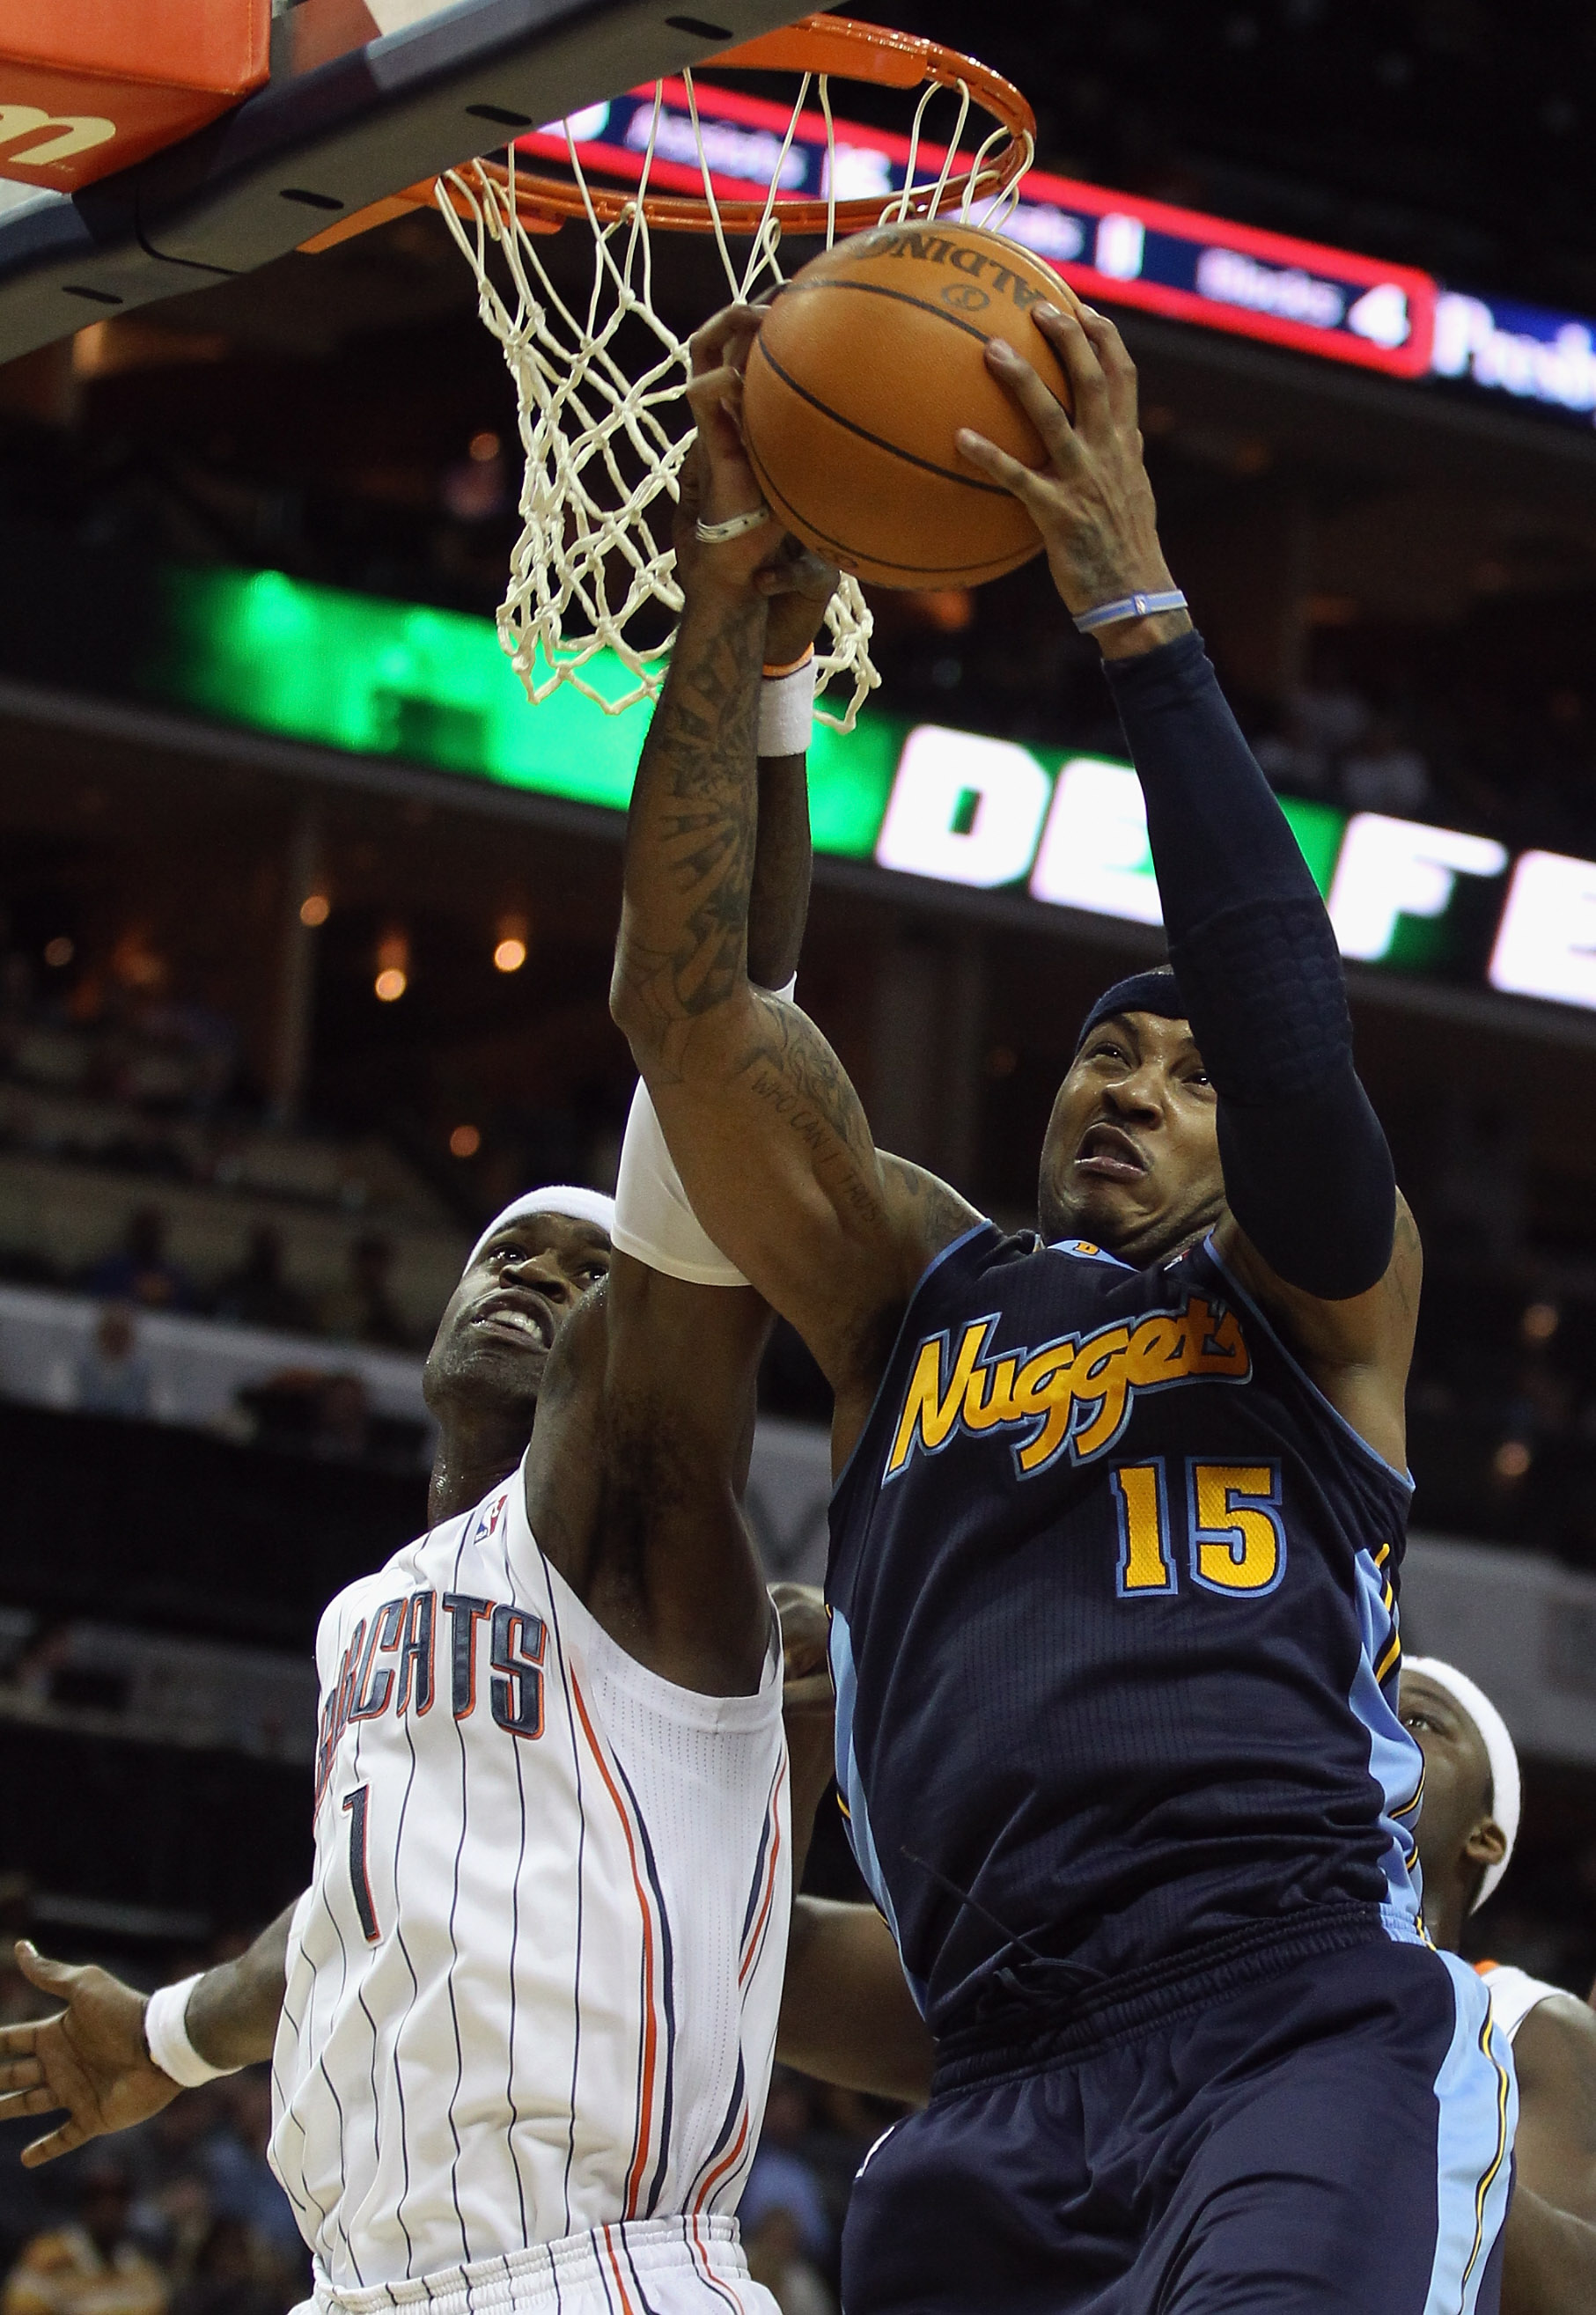 CHARLOTTE, NC - DECEMBER 07:  Carmelo Anthony #15 of the Denver Nuggets grabs a rebound over Stephen Jackson #1 of the Charlotte Bobcats during their game at Time Warner Cable Arena on December 7, 2010 in Charlotte, North Carolina.  NOTE TO USER: User exp